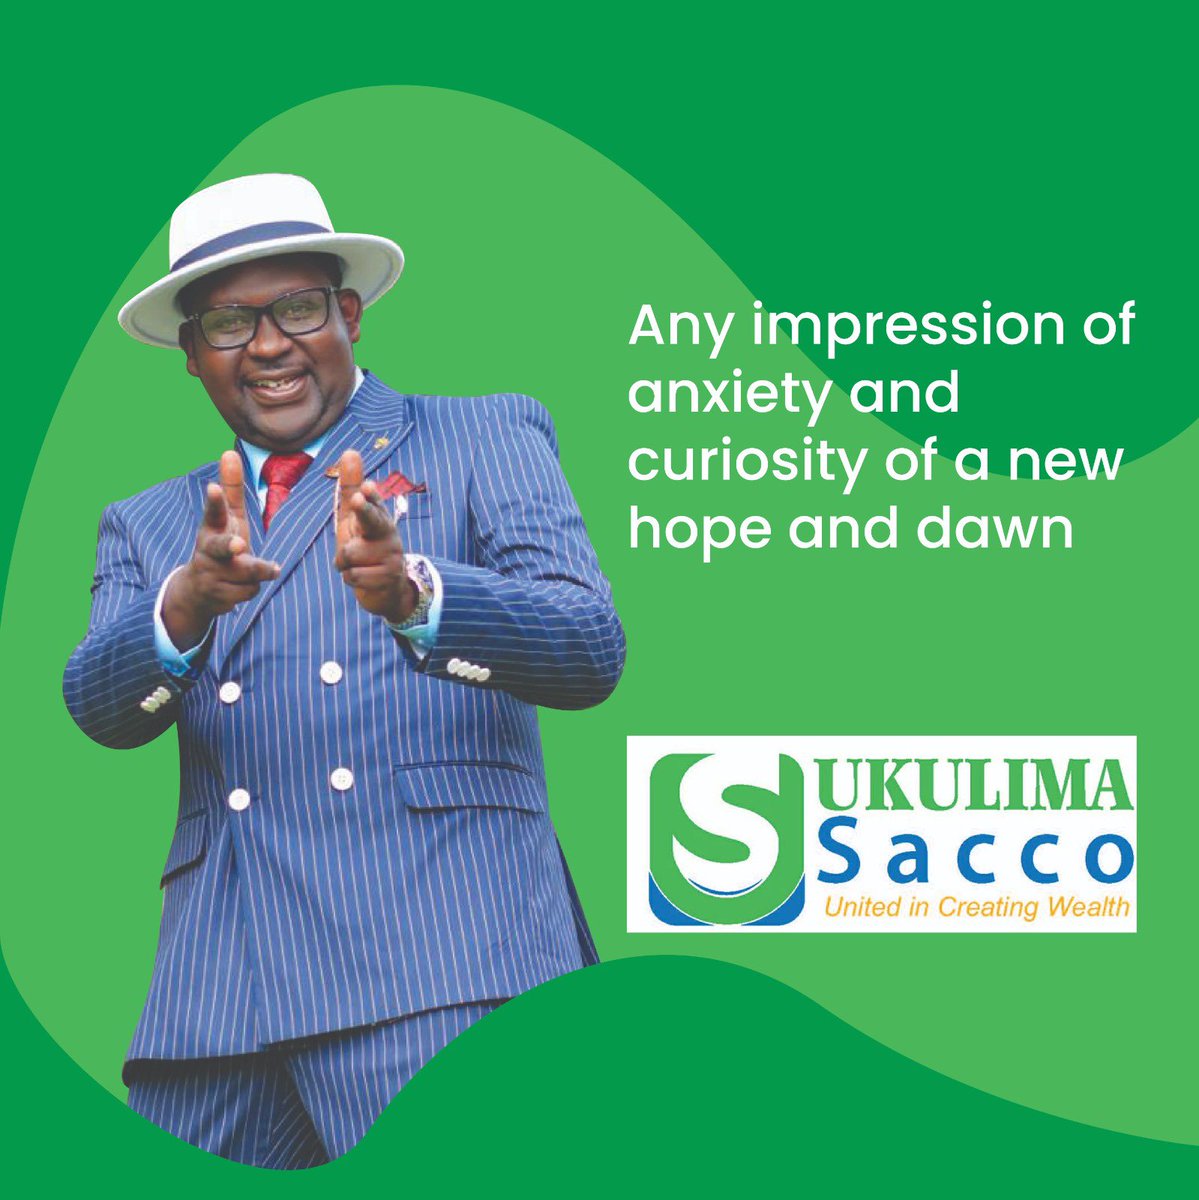 Stay tuned tomorrow Friday 6:30pm as Ukulima Sacco does its big reveal. Live on on this page and @terrence creative page.